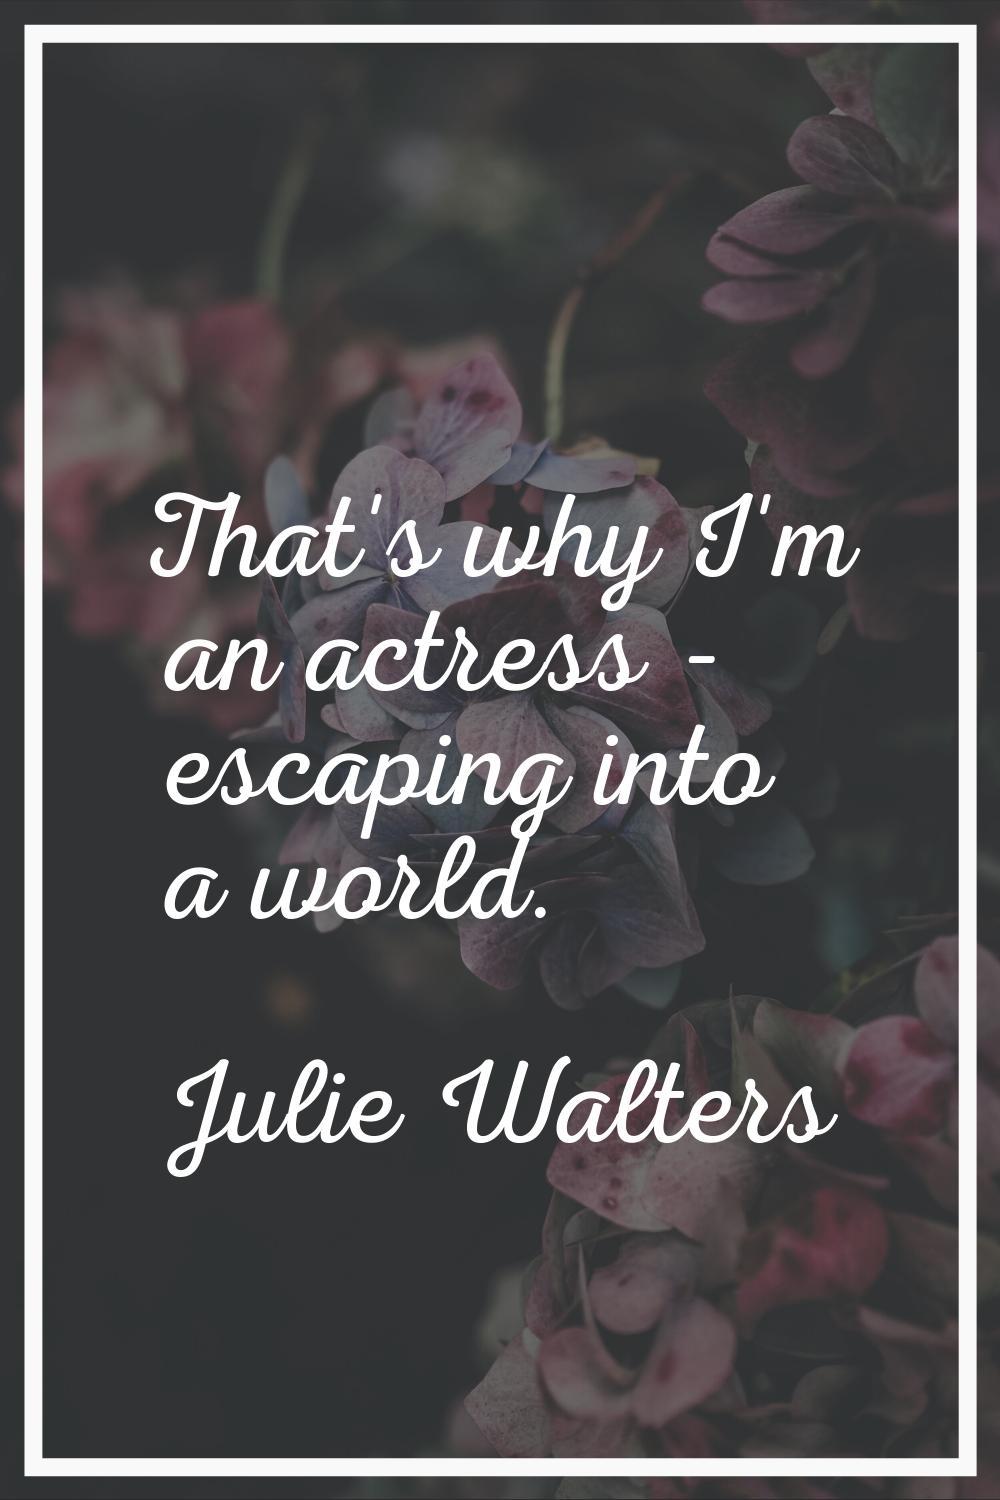 That's why I'm an actress - escaping into a world.